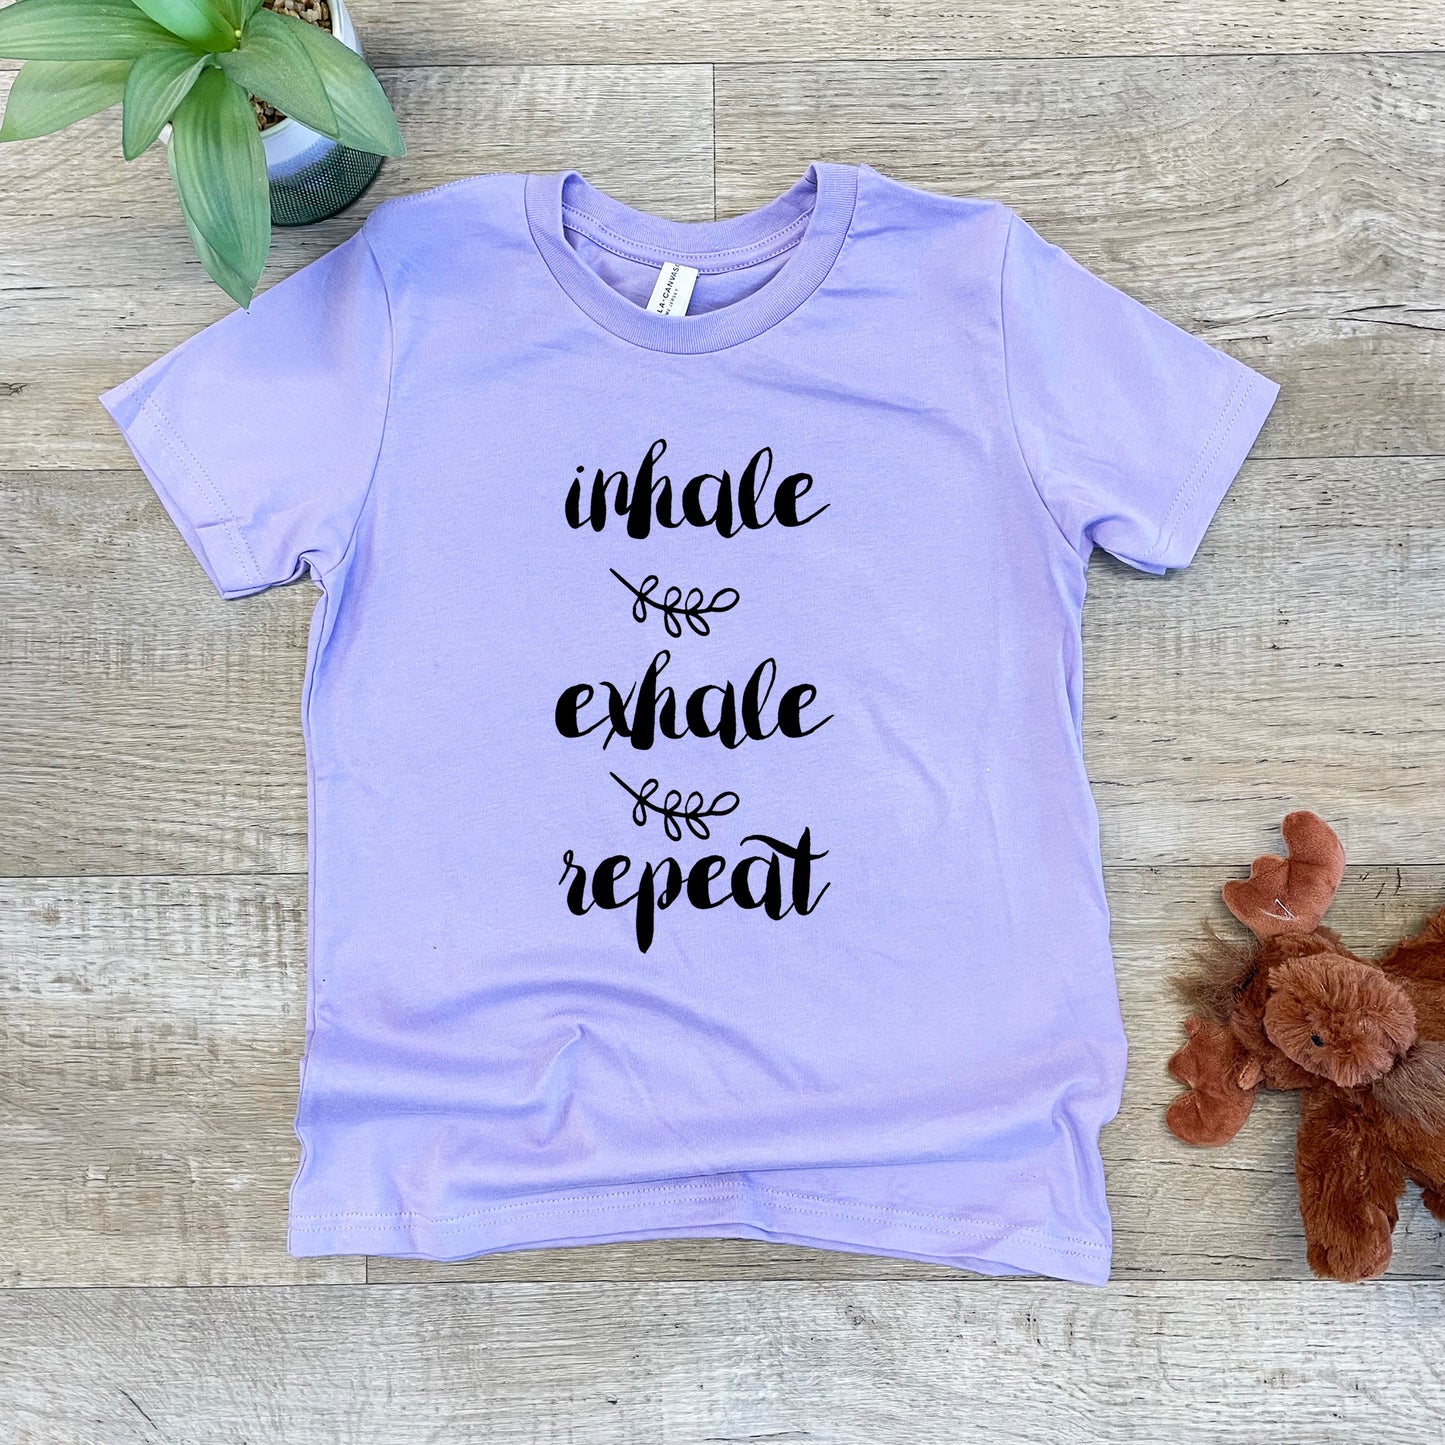 Inhale, Exhale, Repeat - Kid's Tee - Columbia Blue or Lavender